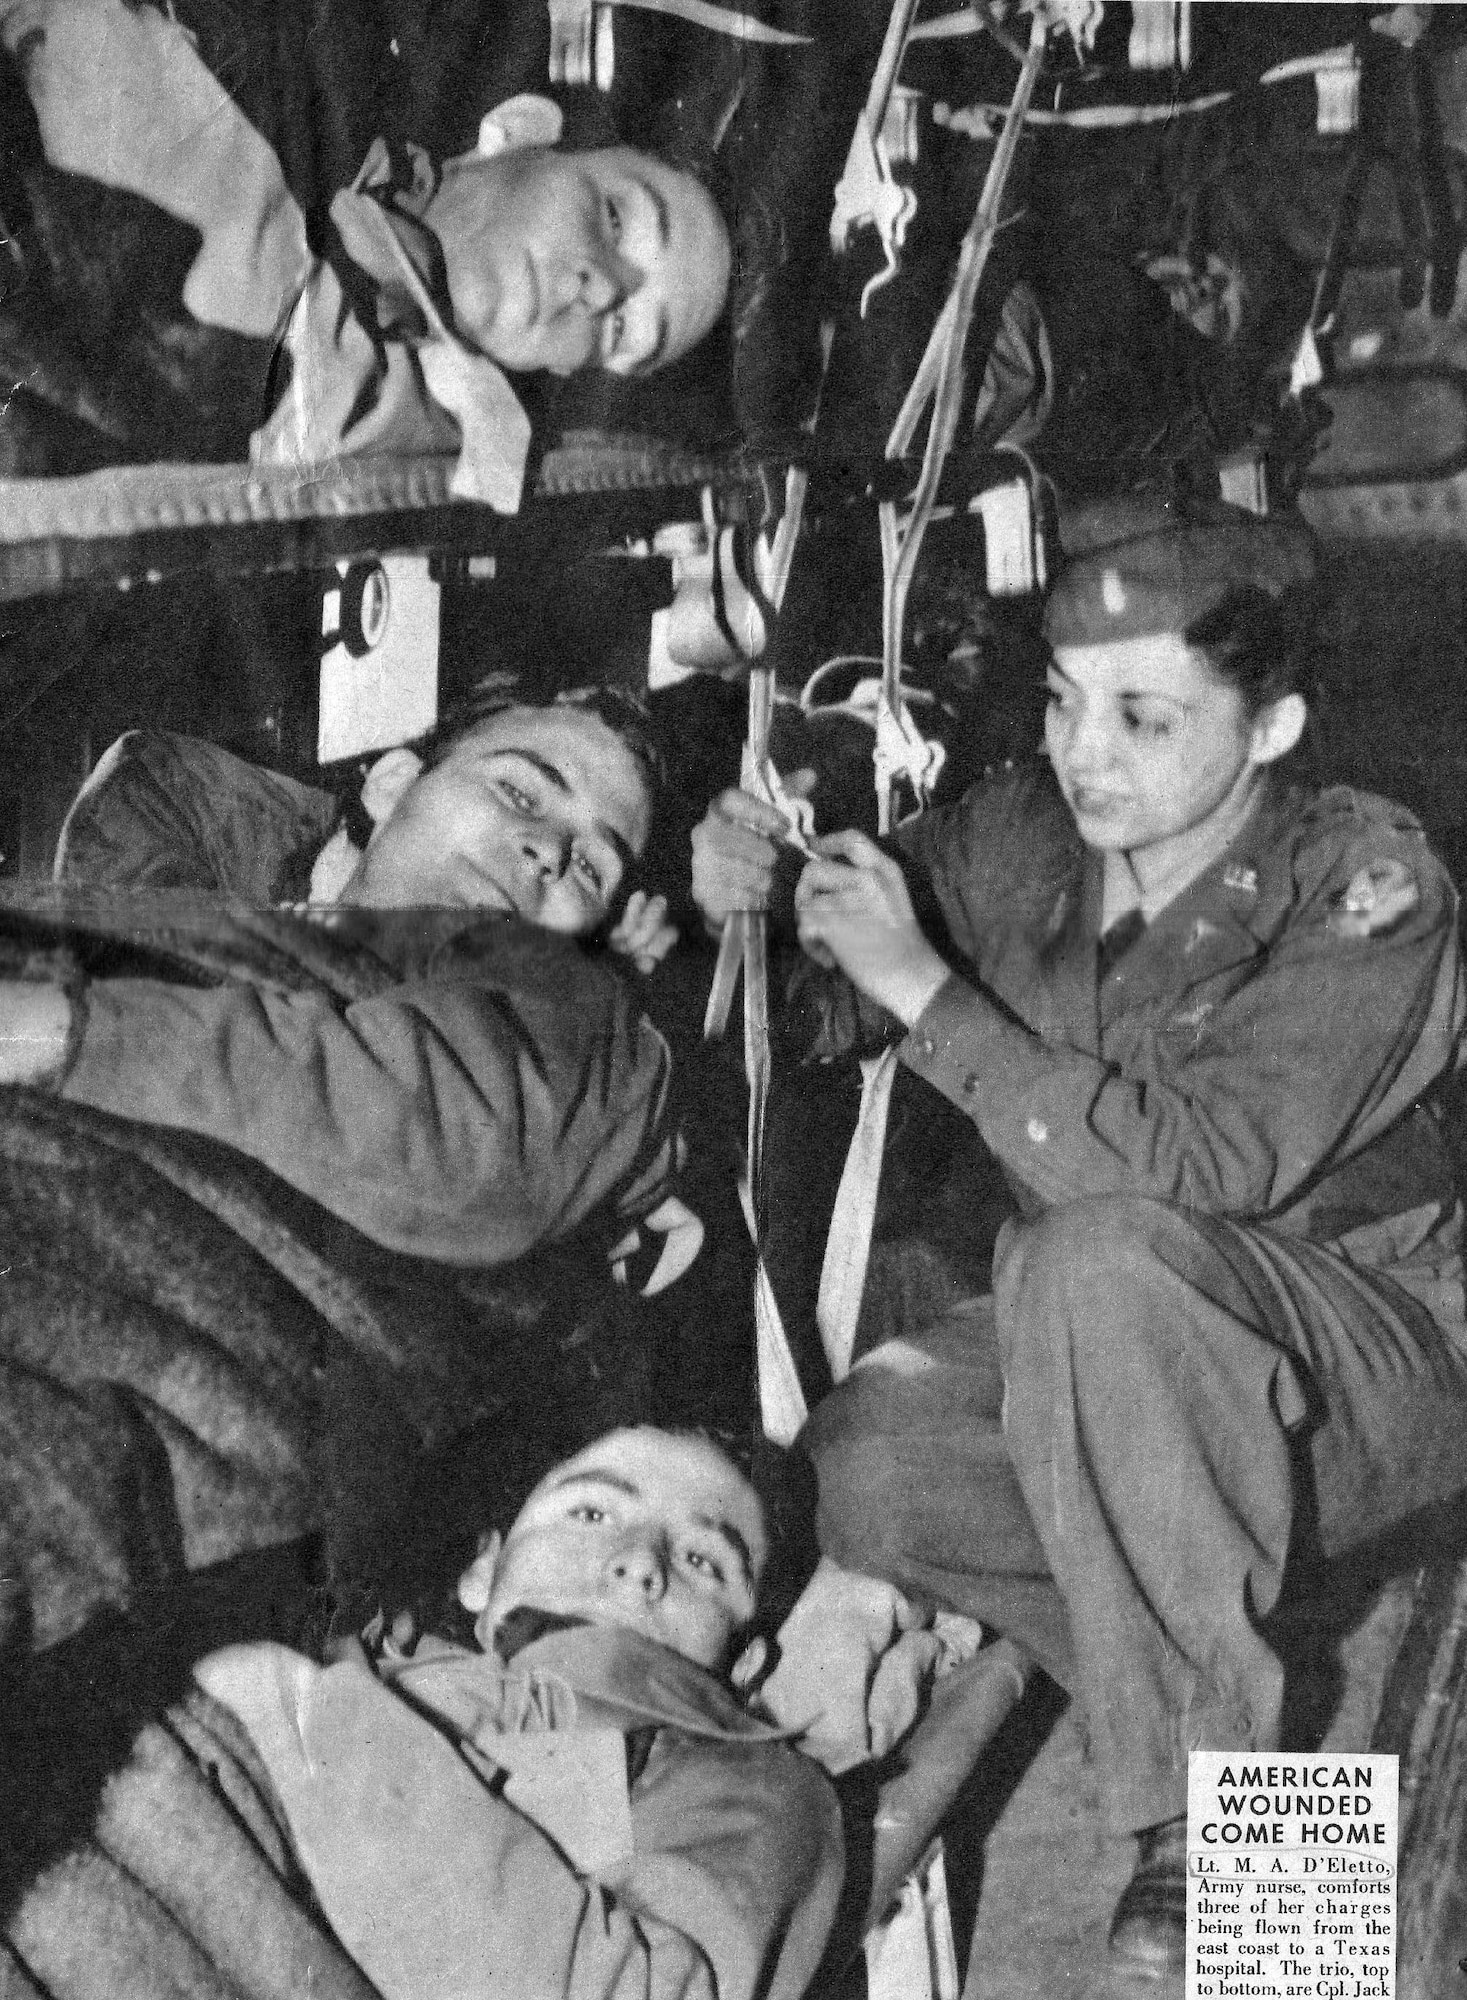 U.S. Army Air Corps flight nurse 1st Lt. Madeline “Del” D’Eletto comforts three wounded soldiers on a flight from the east coast of the U.S. to a Texas hospital. (Courtesy photo by Madeline D’Eletto)